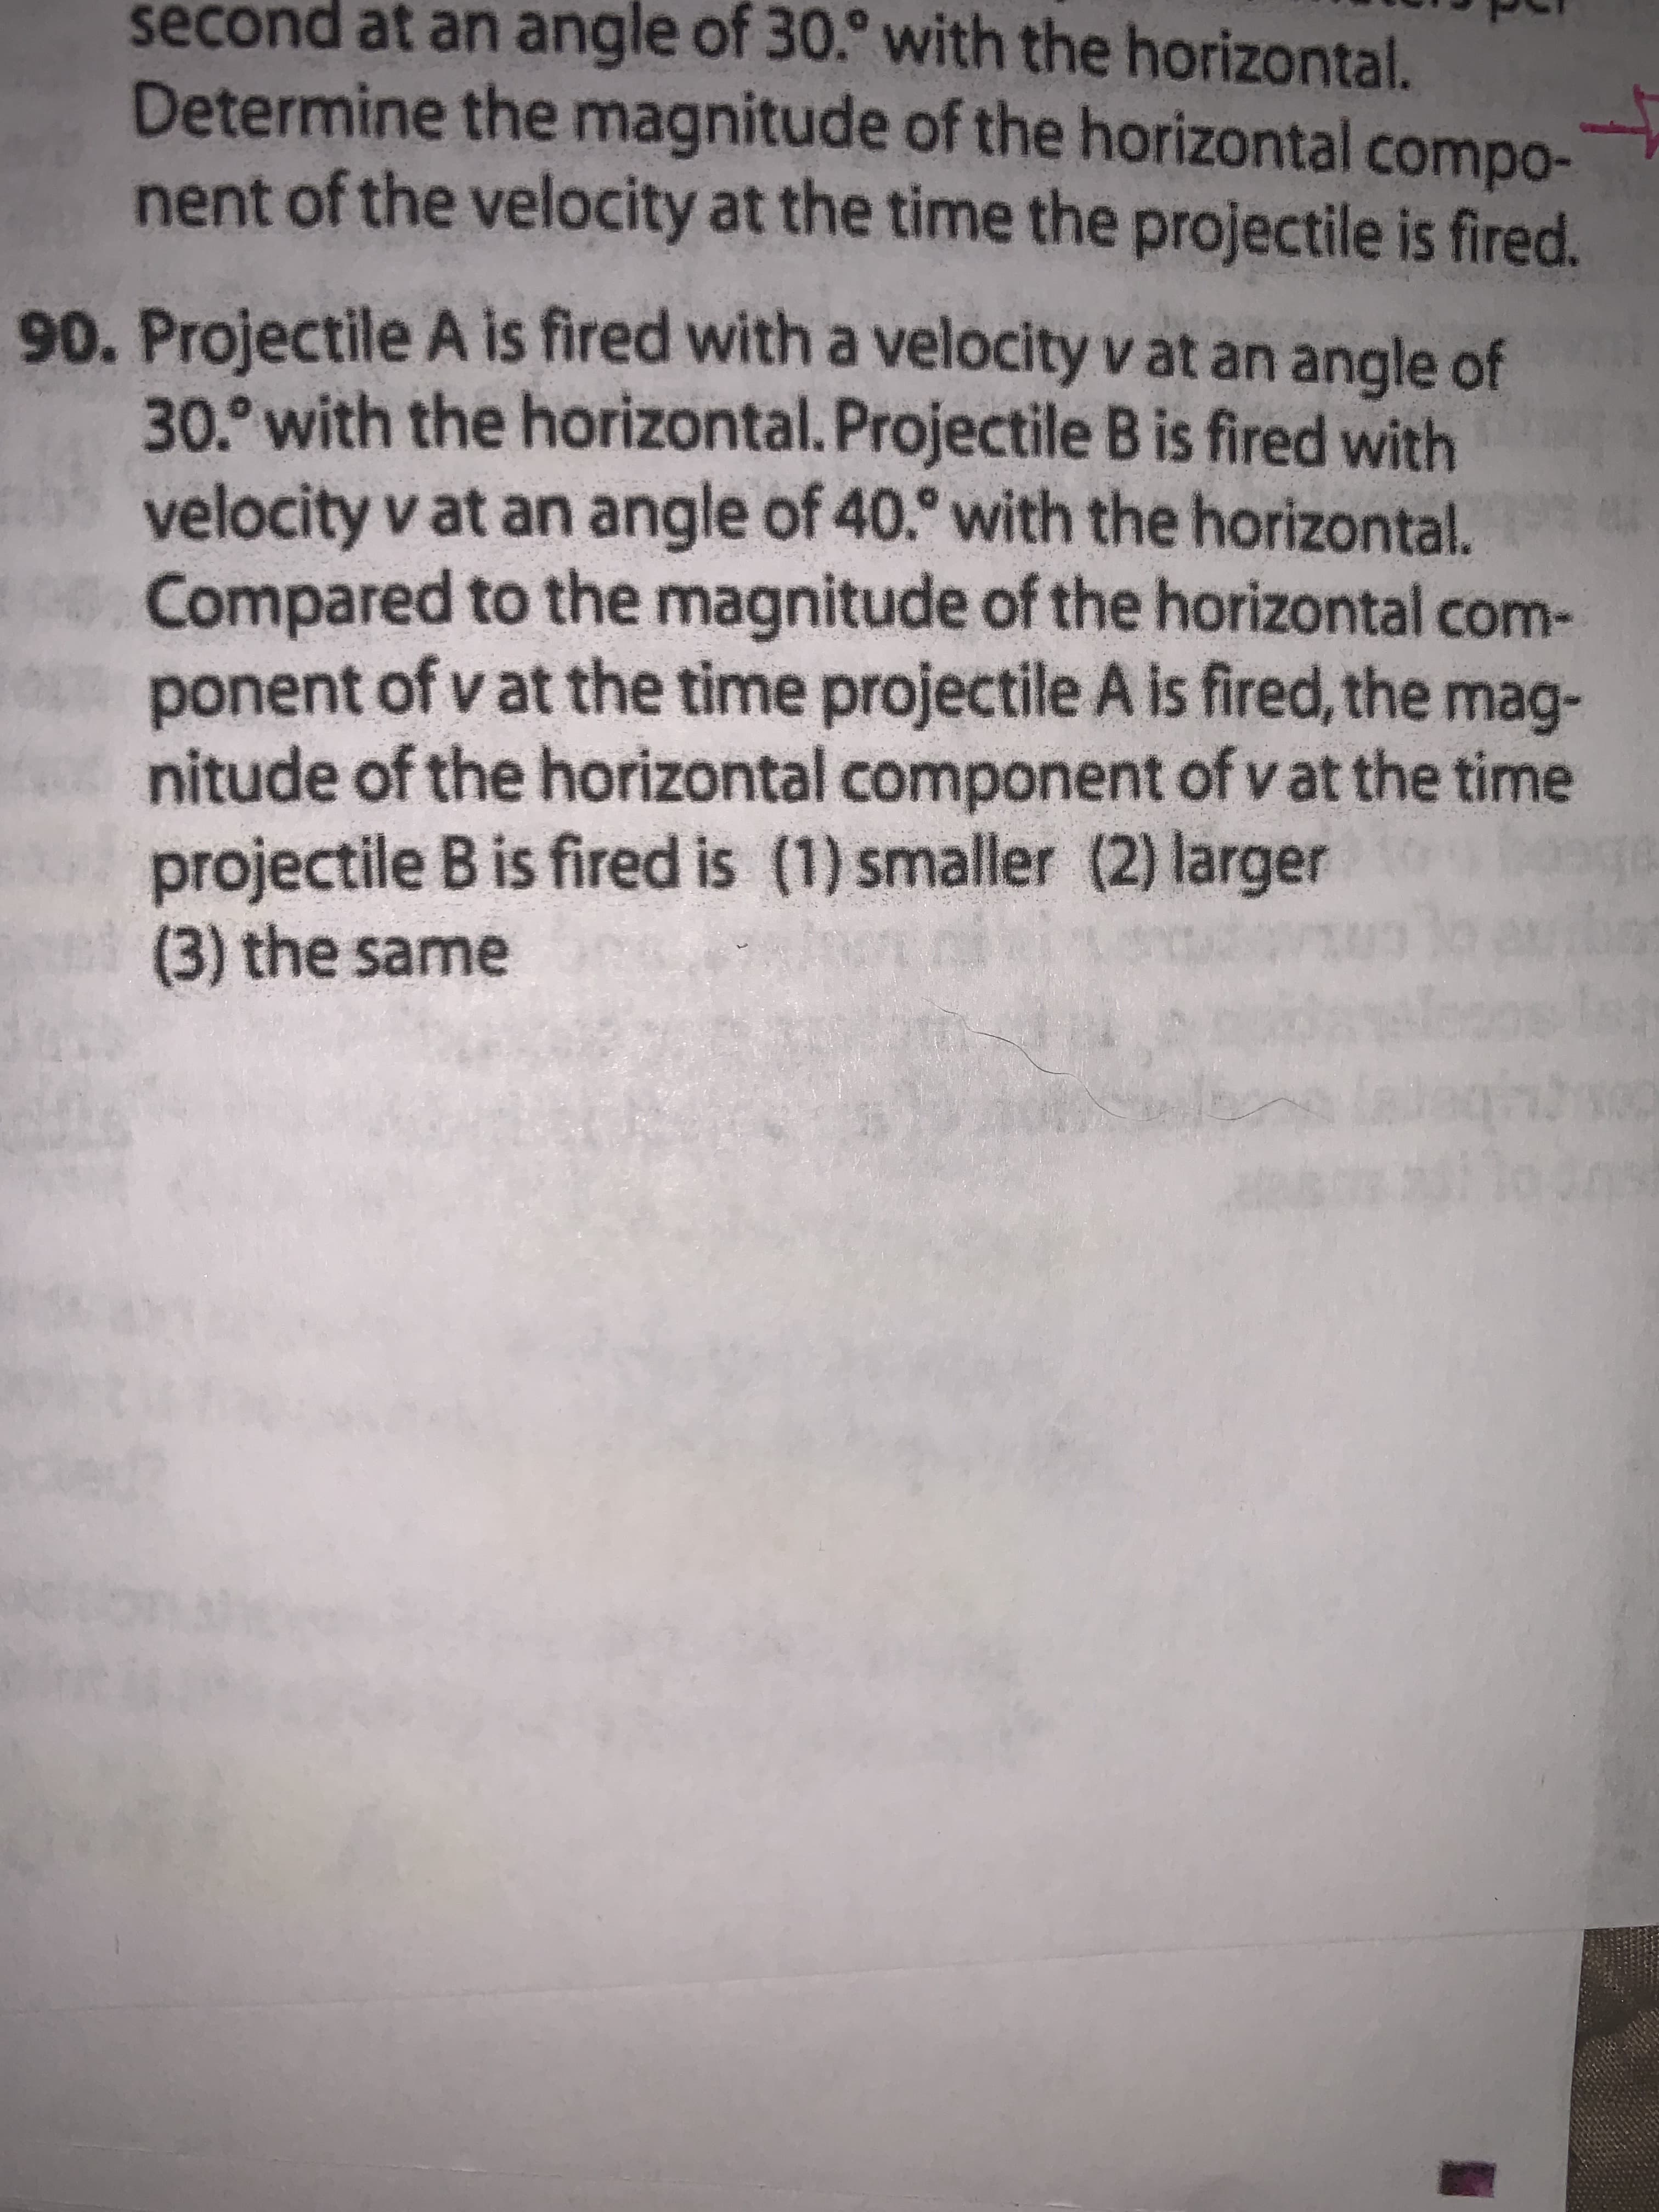 Projectile A is fired with a velocity v at an angle of
30. with the horizontal. Projectile B is fired with
velocity v at an angle of 40.° with the horizontal.
Compared to the magnitude of the horizontal com-
ponent of v at the time projectile A is fired, the mag-
nitude of the horizontal component of v at the time
projectile B is fired is (1) smaller (2) larger
